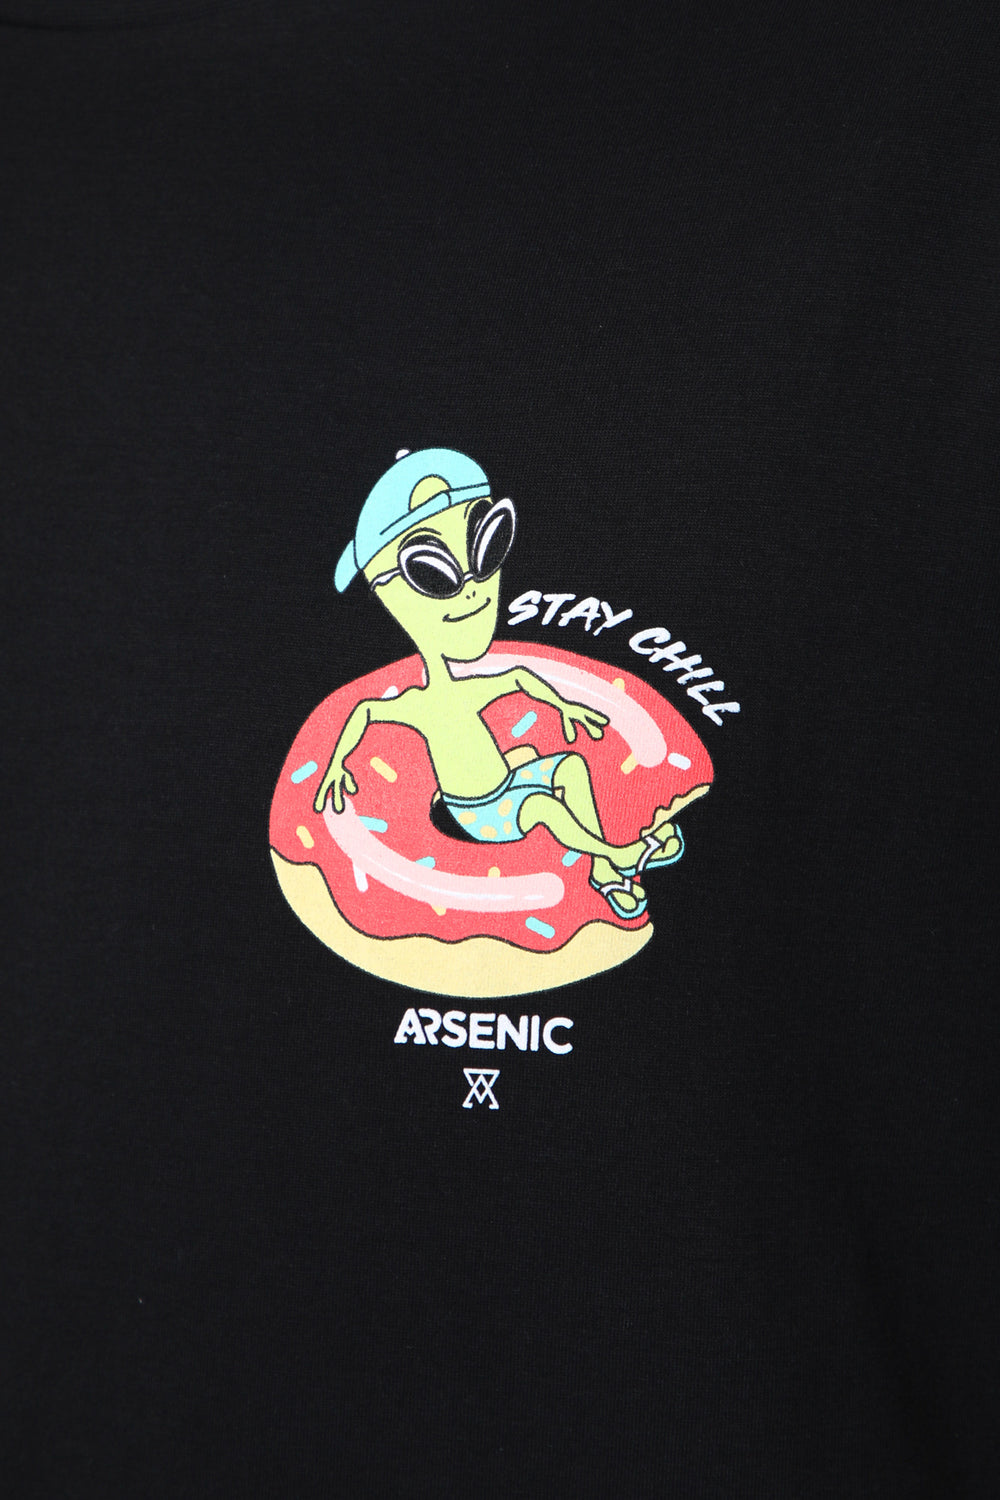 Arsenic Mens Stay Chill T-Shirt Arsenic Mens Stay Chill T-Shirt